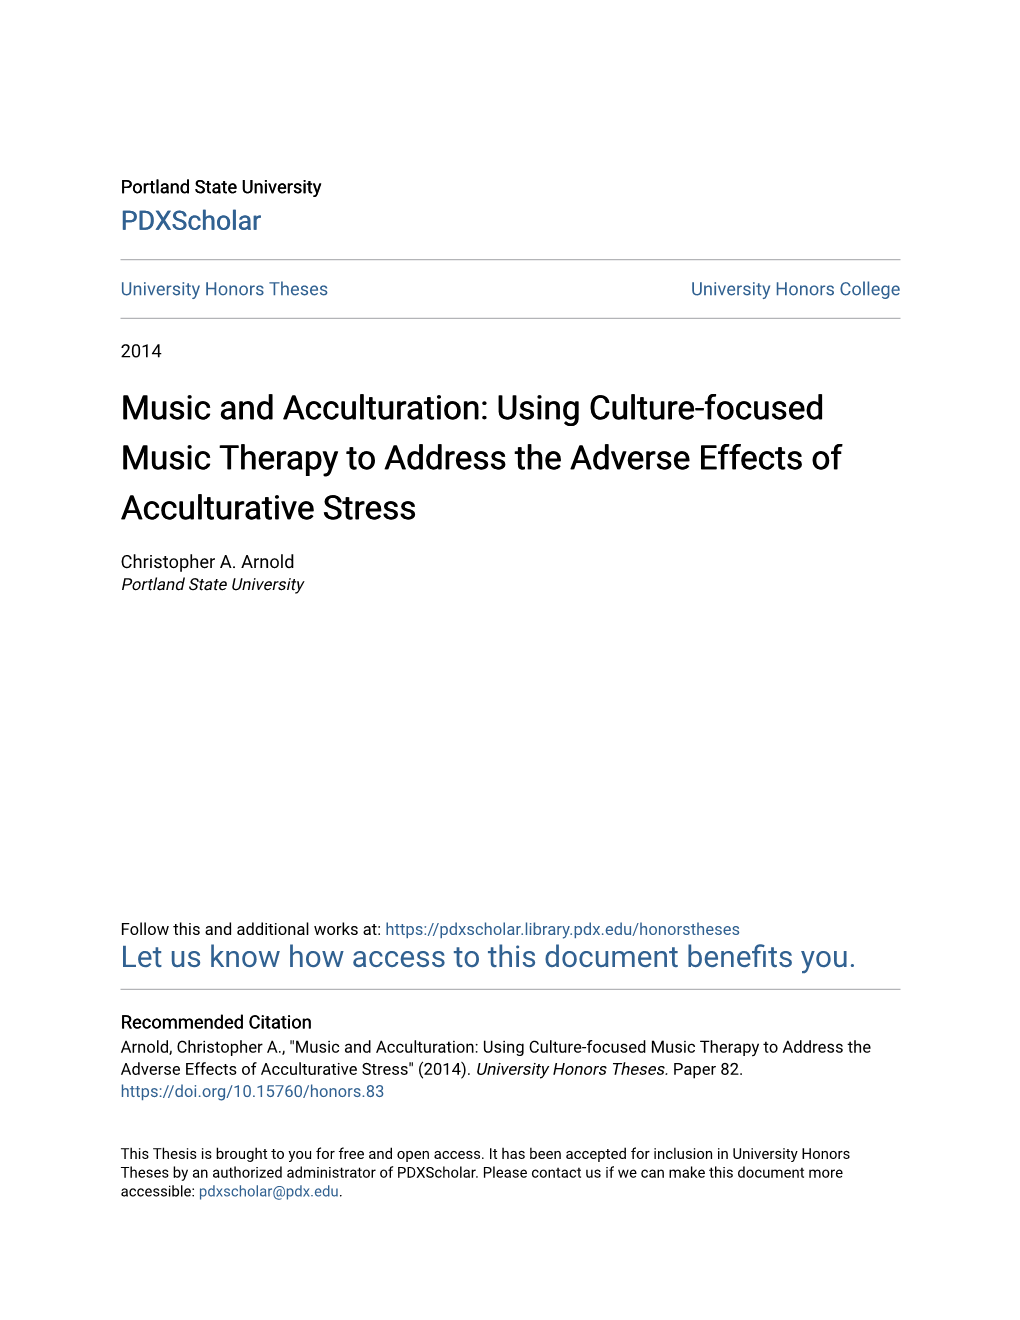 Music and Acculturation: Using Culture-Focused Music Therapy to Address the Adverse Effects of Acculturative Stress